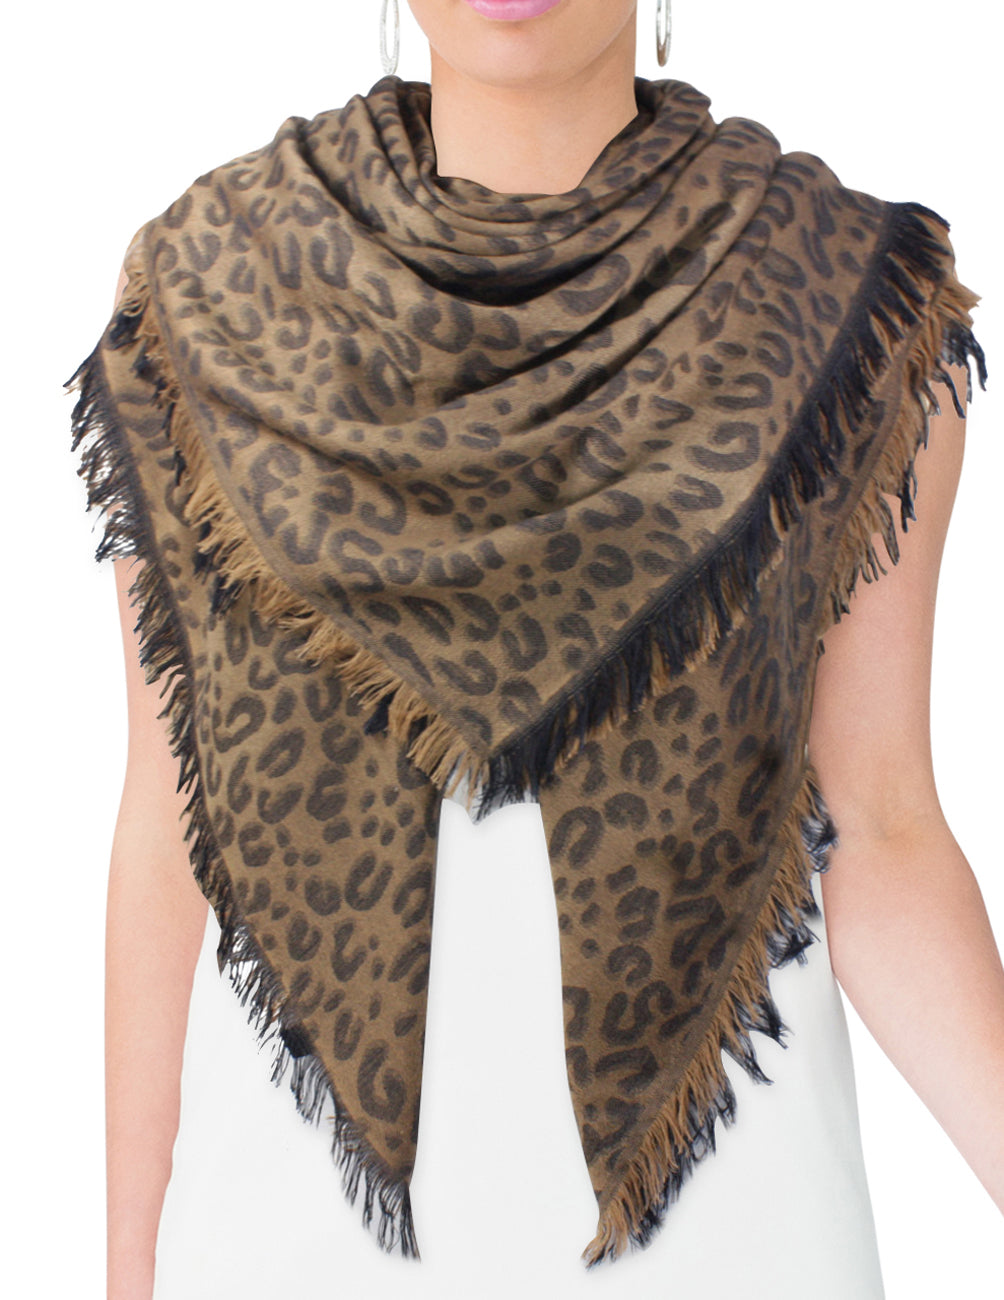  Brown Leopard Print Scarf - Silk and Wool